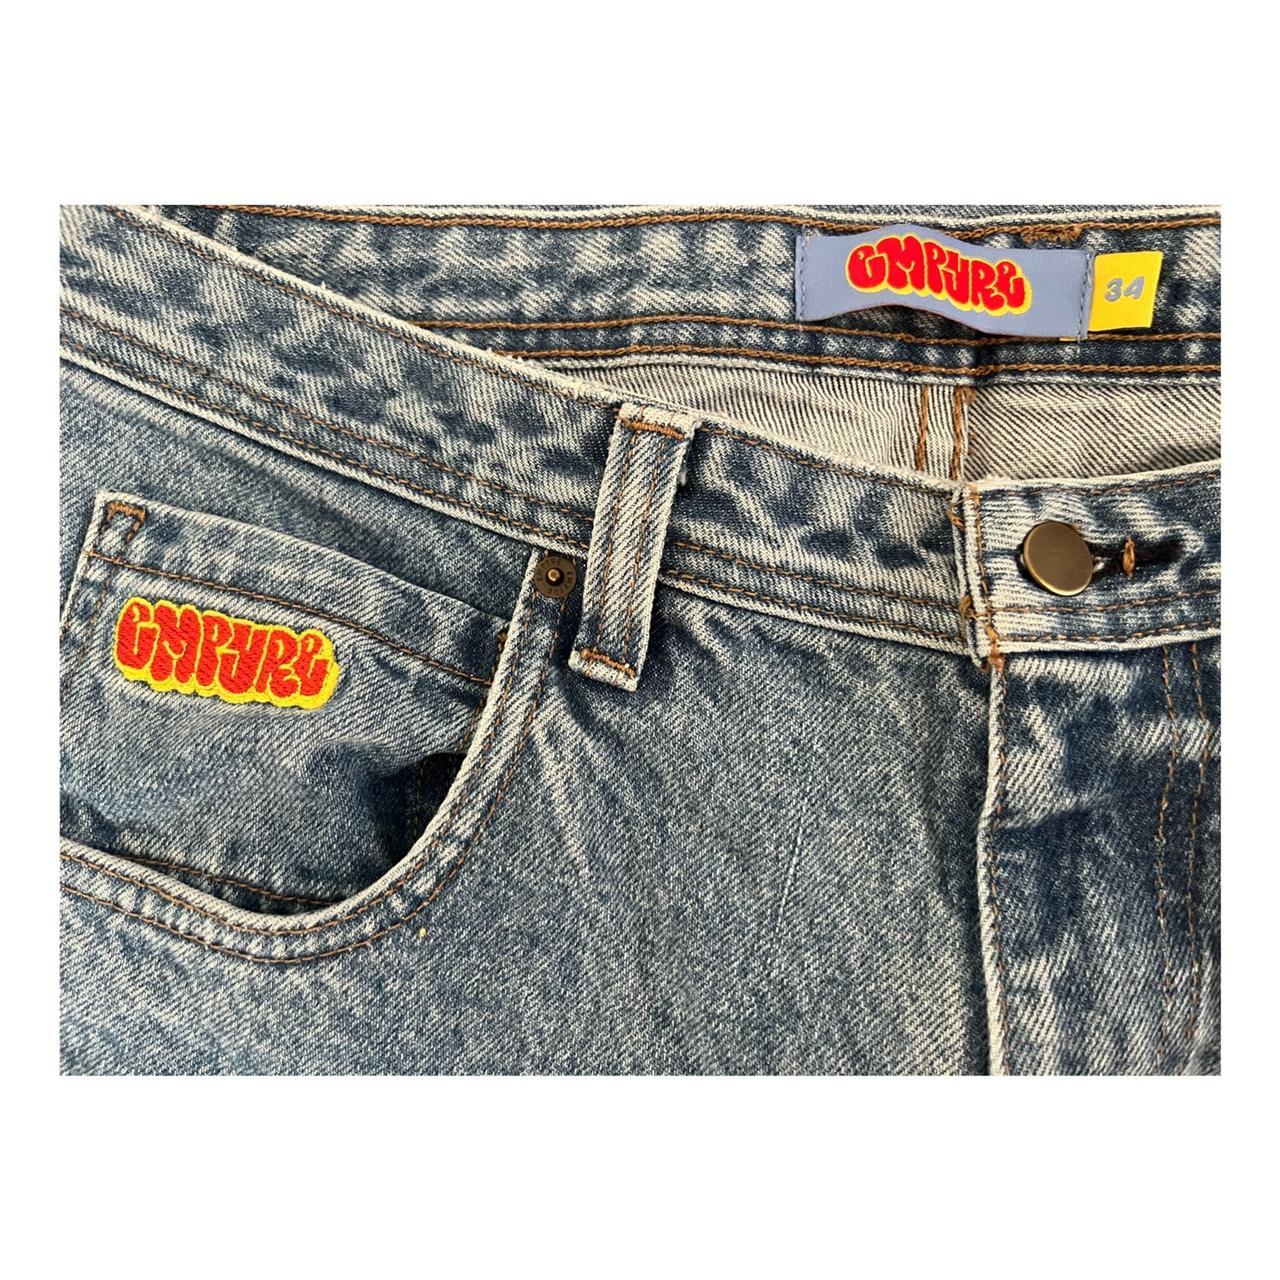 Empyre Pants/Jeans For Sale for Sale in Hesperia, CA - OfferUp